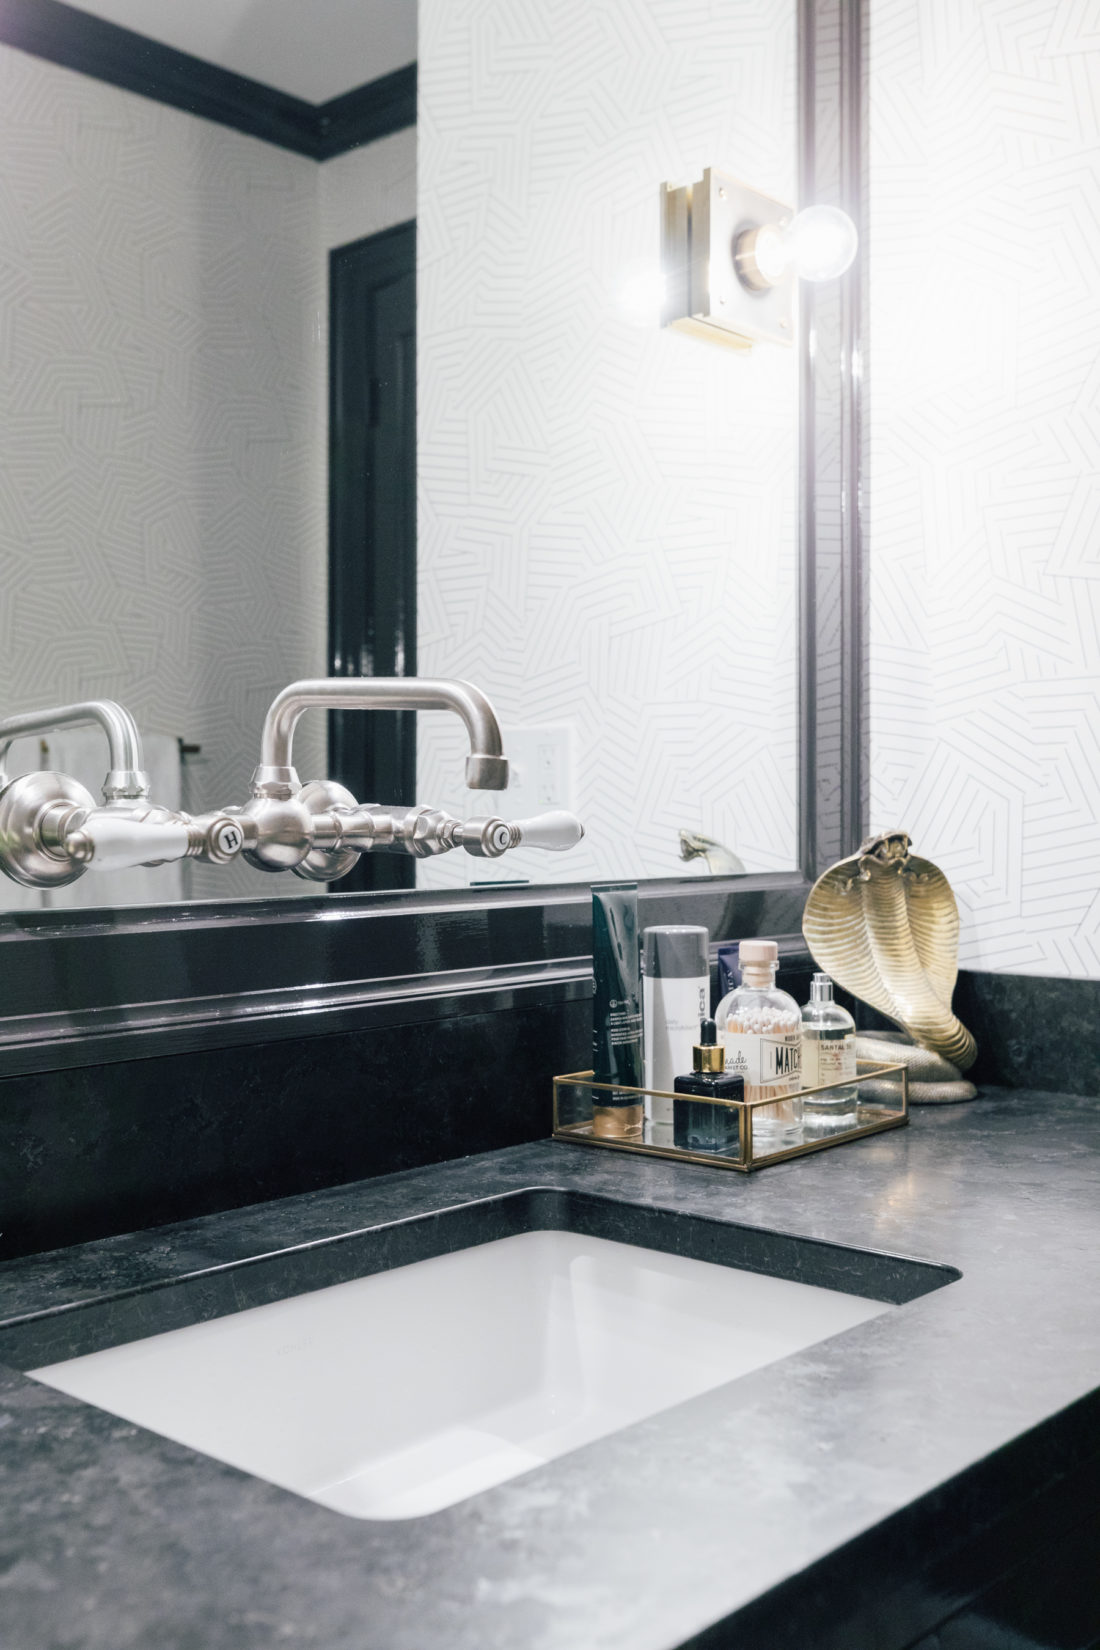 The Saint Henry Black granite countertop from Polycor inside Kyle Martino's masculine bathroom in his newly renovated Connecticut home